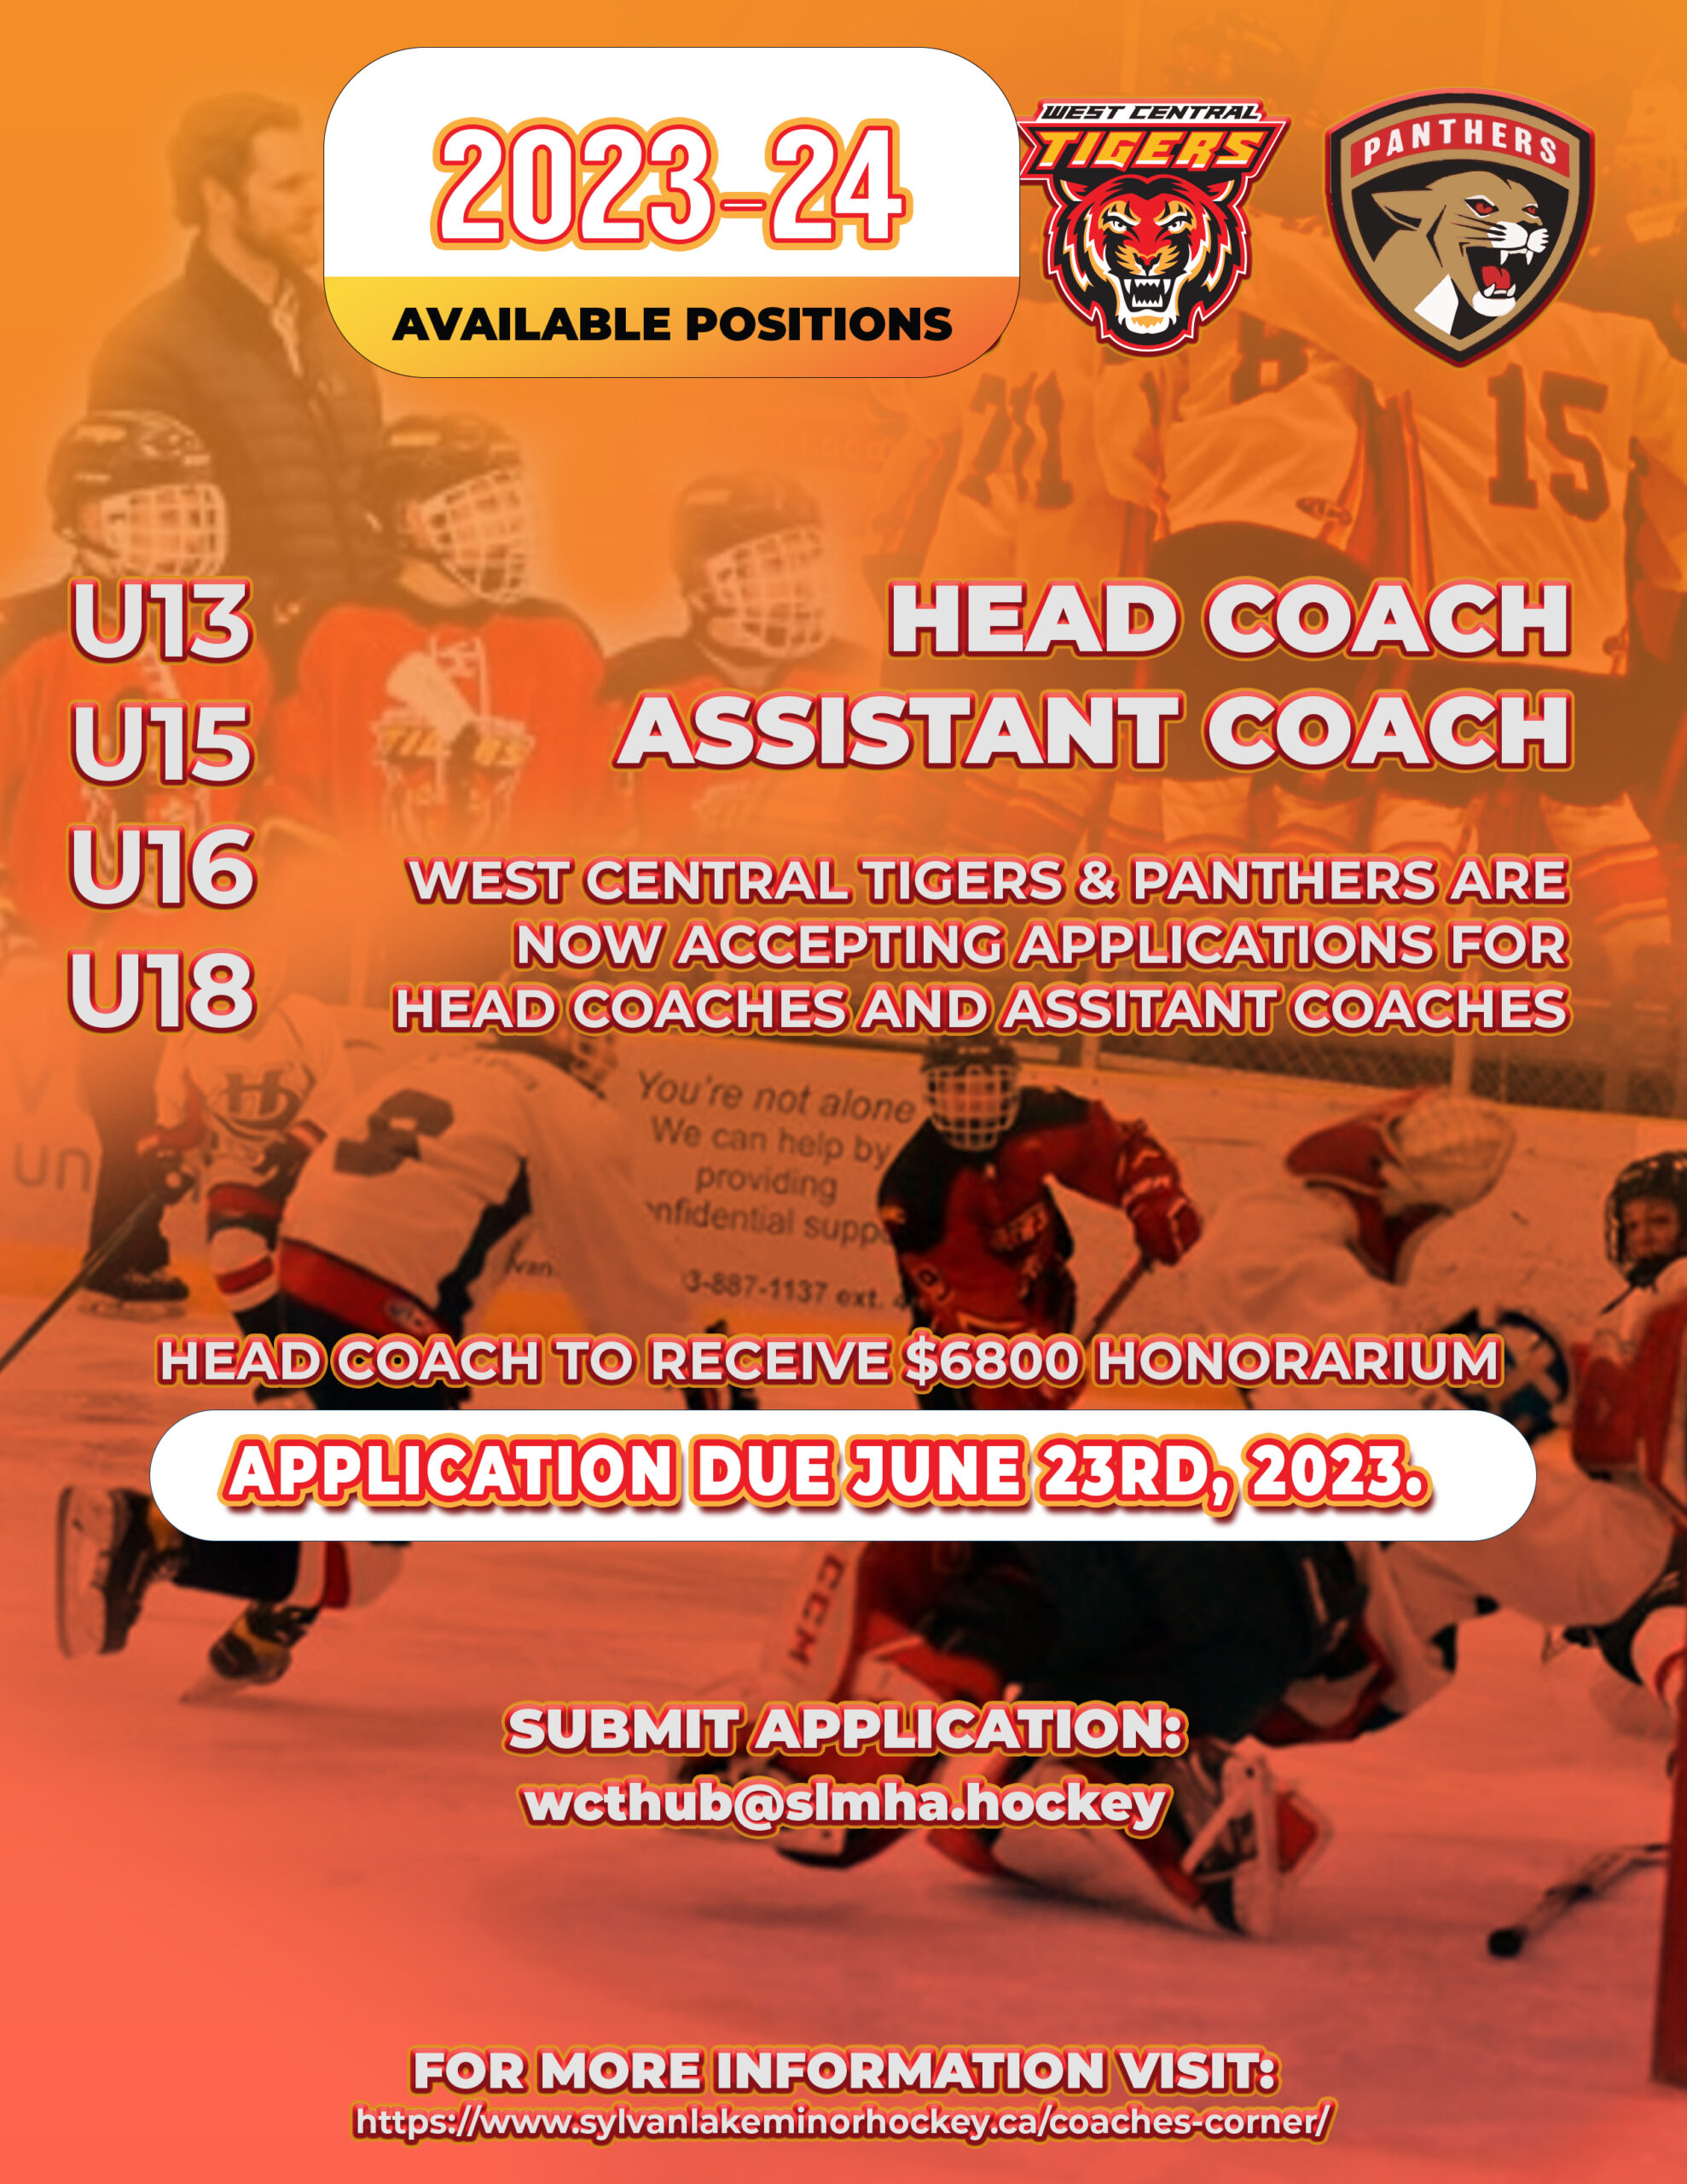 Coaching-Positions-AD-04 (002)23-24